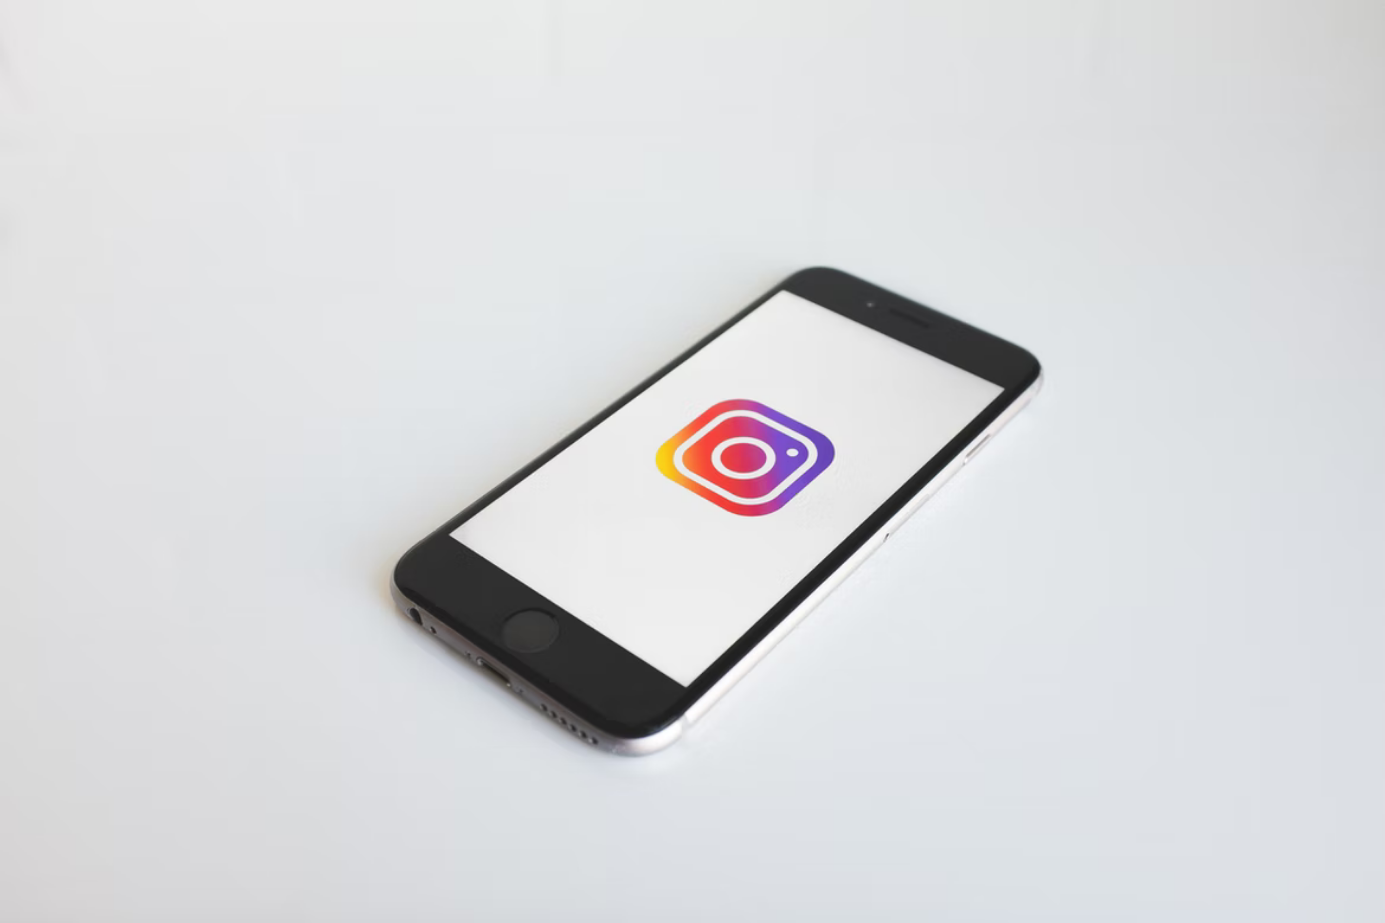 How to share a post to your Instagram Story